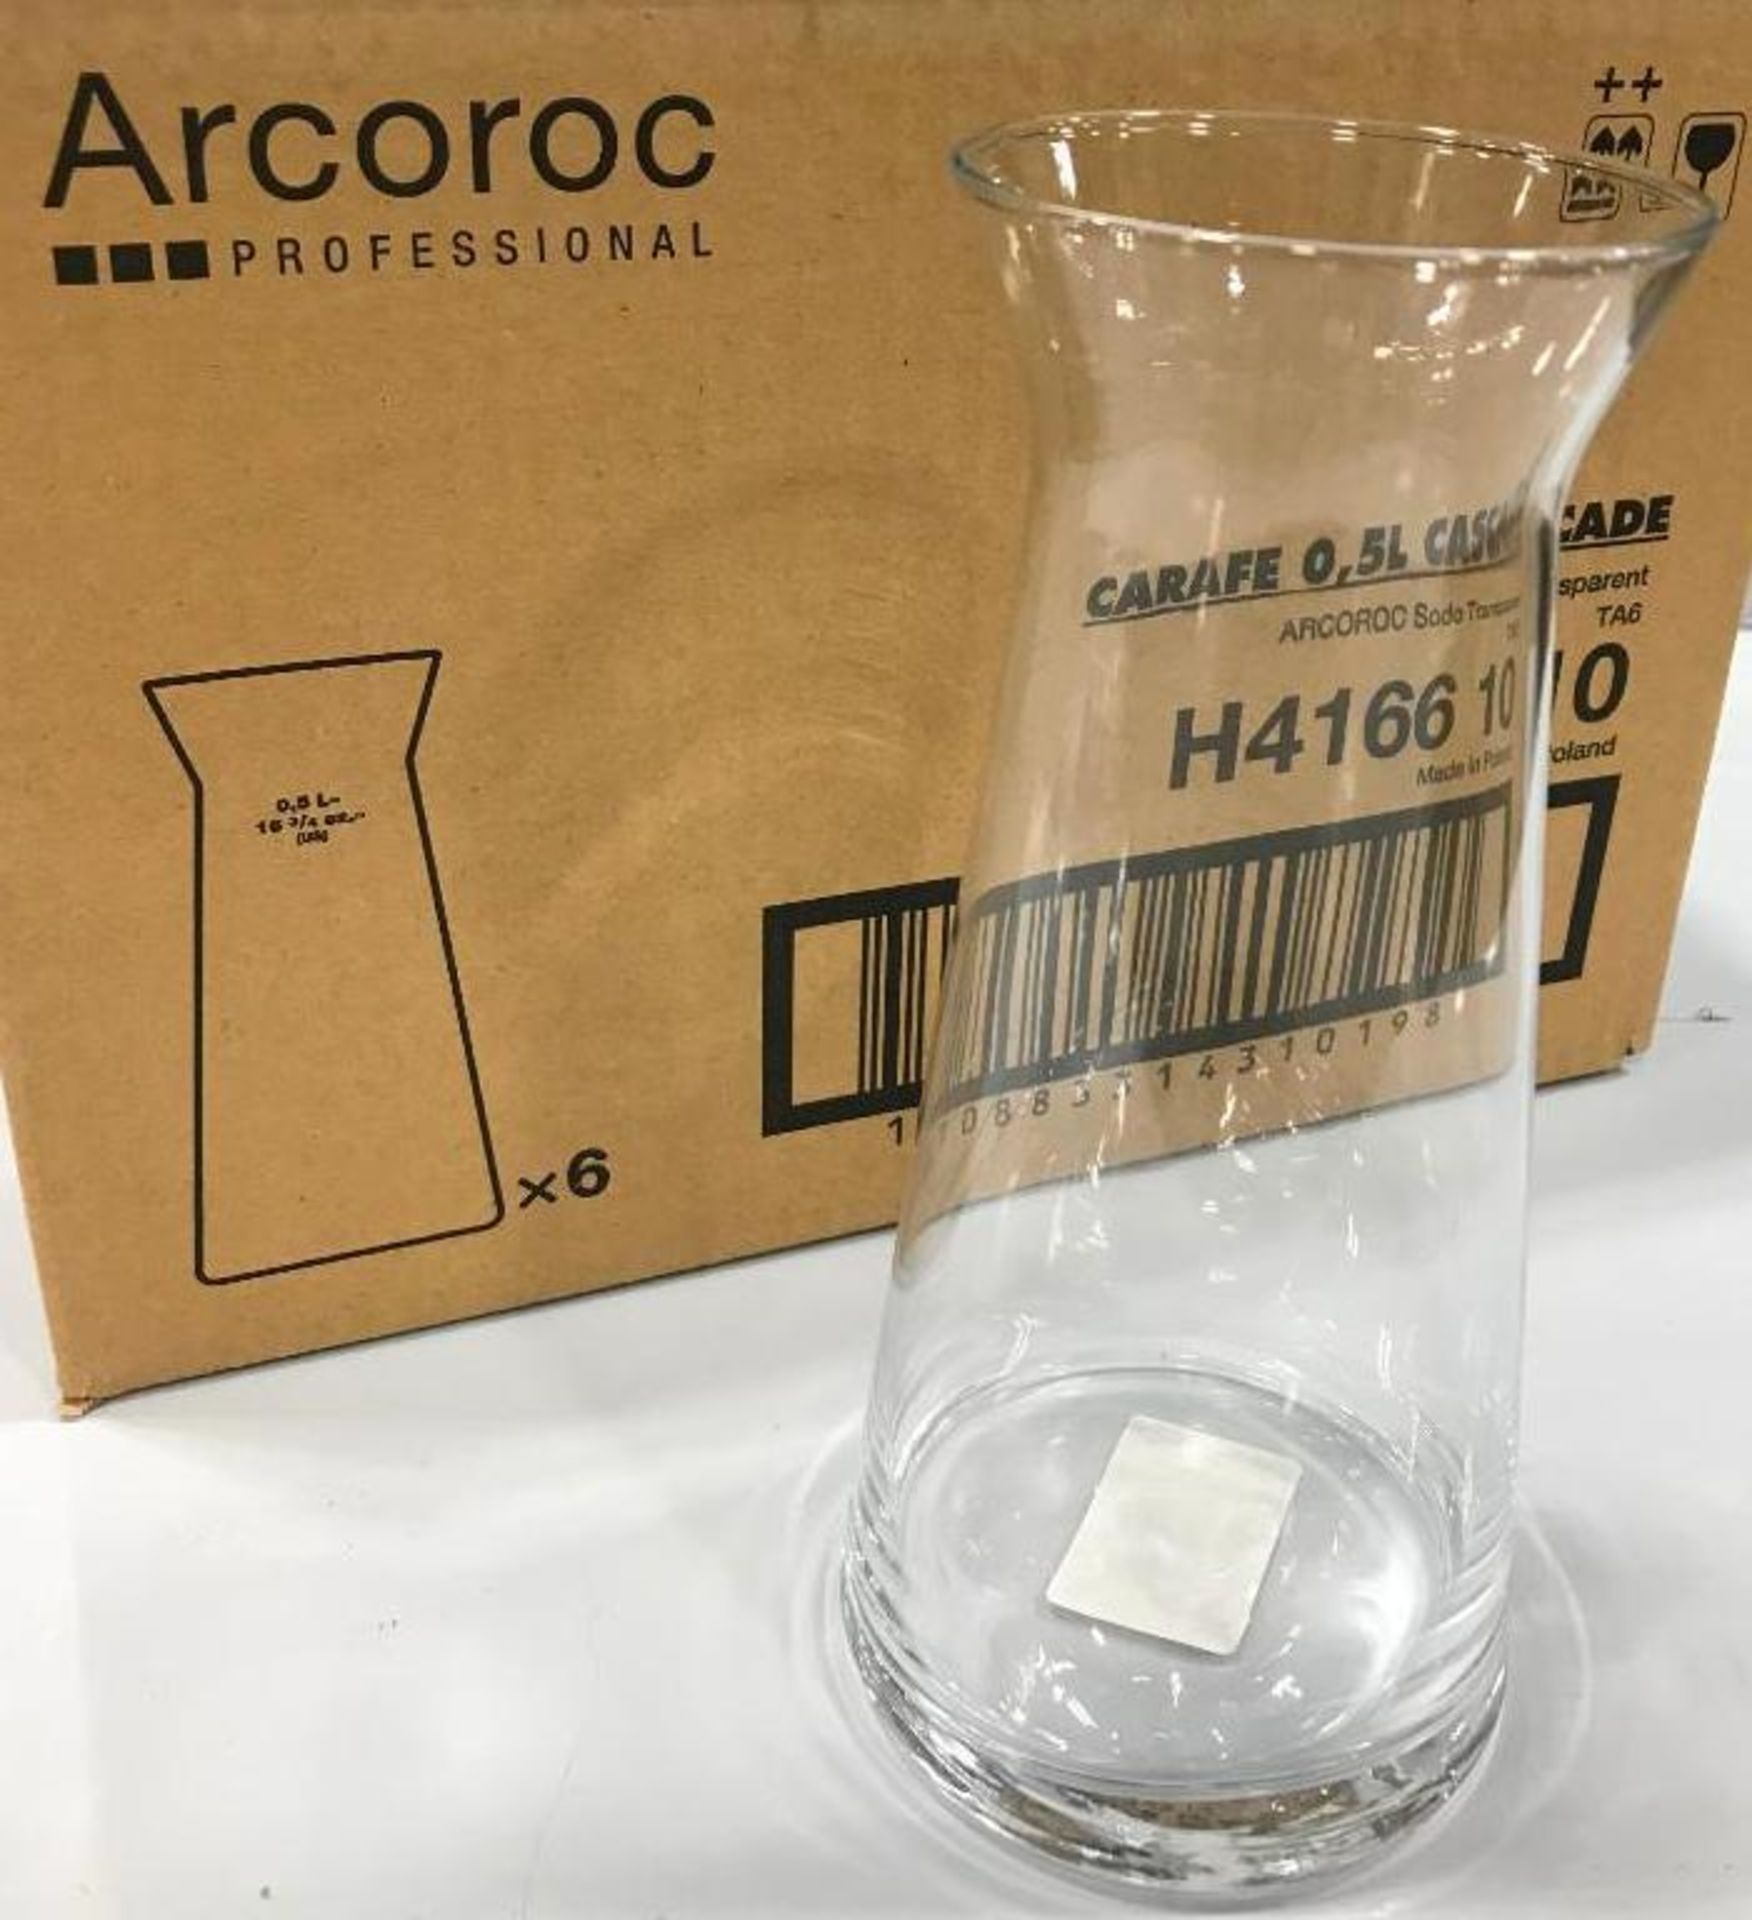 ARCOROC H4166 CASCADE 17 OZ DECANTER - LOT OF 6 - NEW - Image 2 of 4